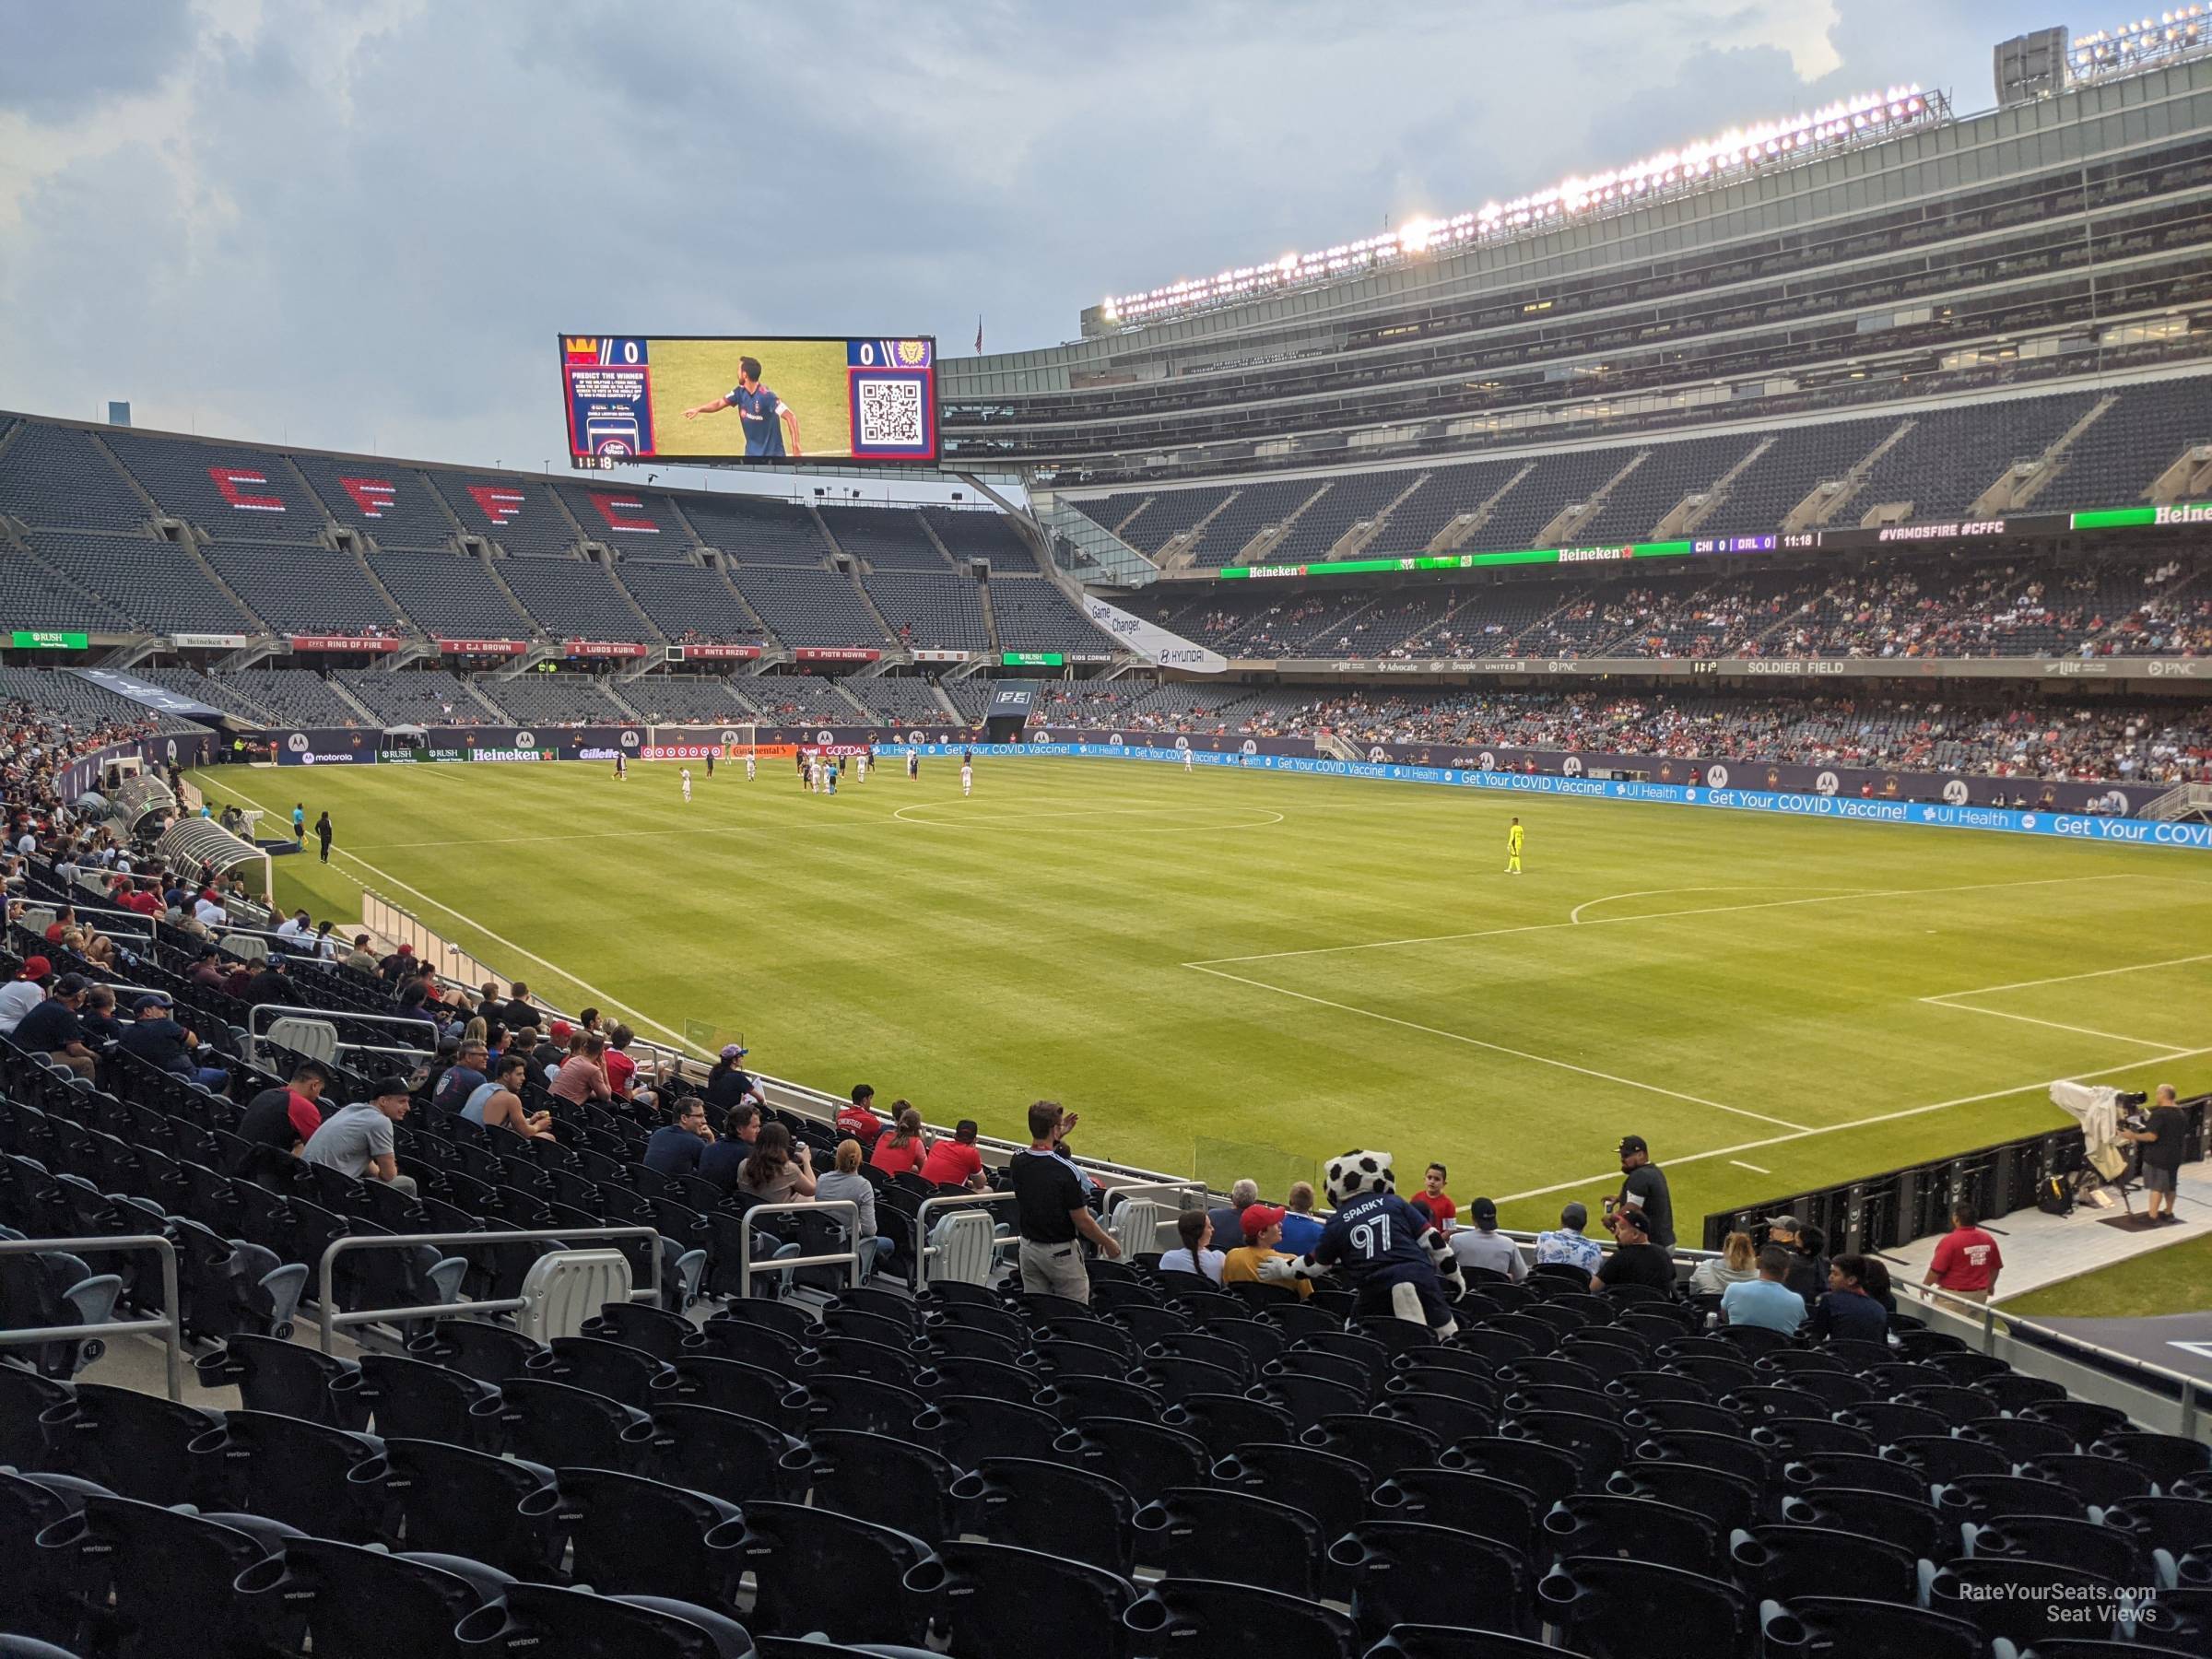 section 128, row 18 seat view  for soccer - soldier field